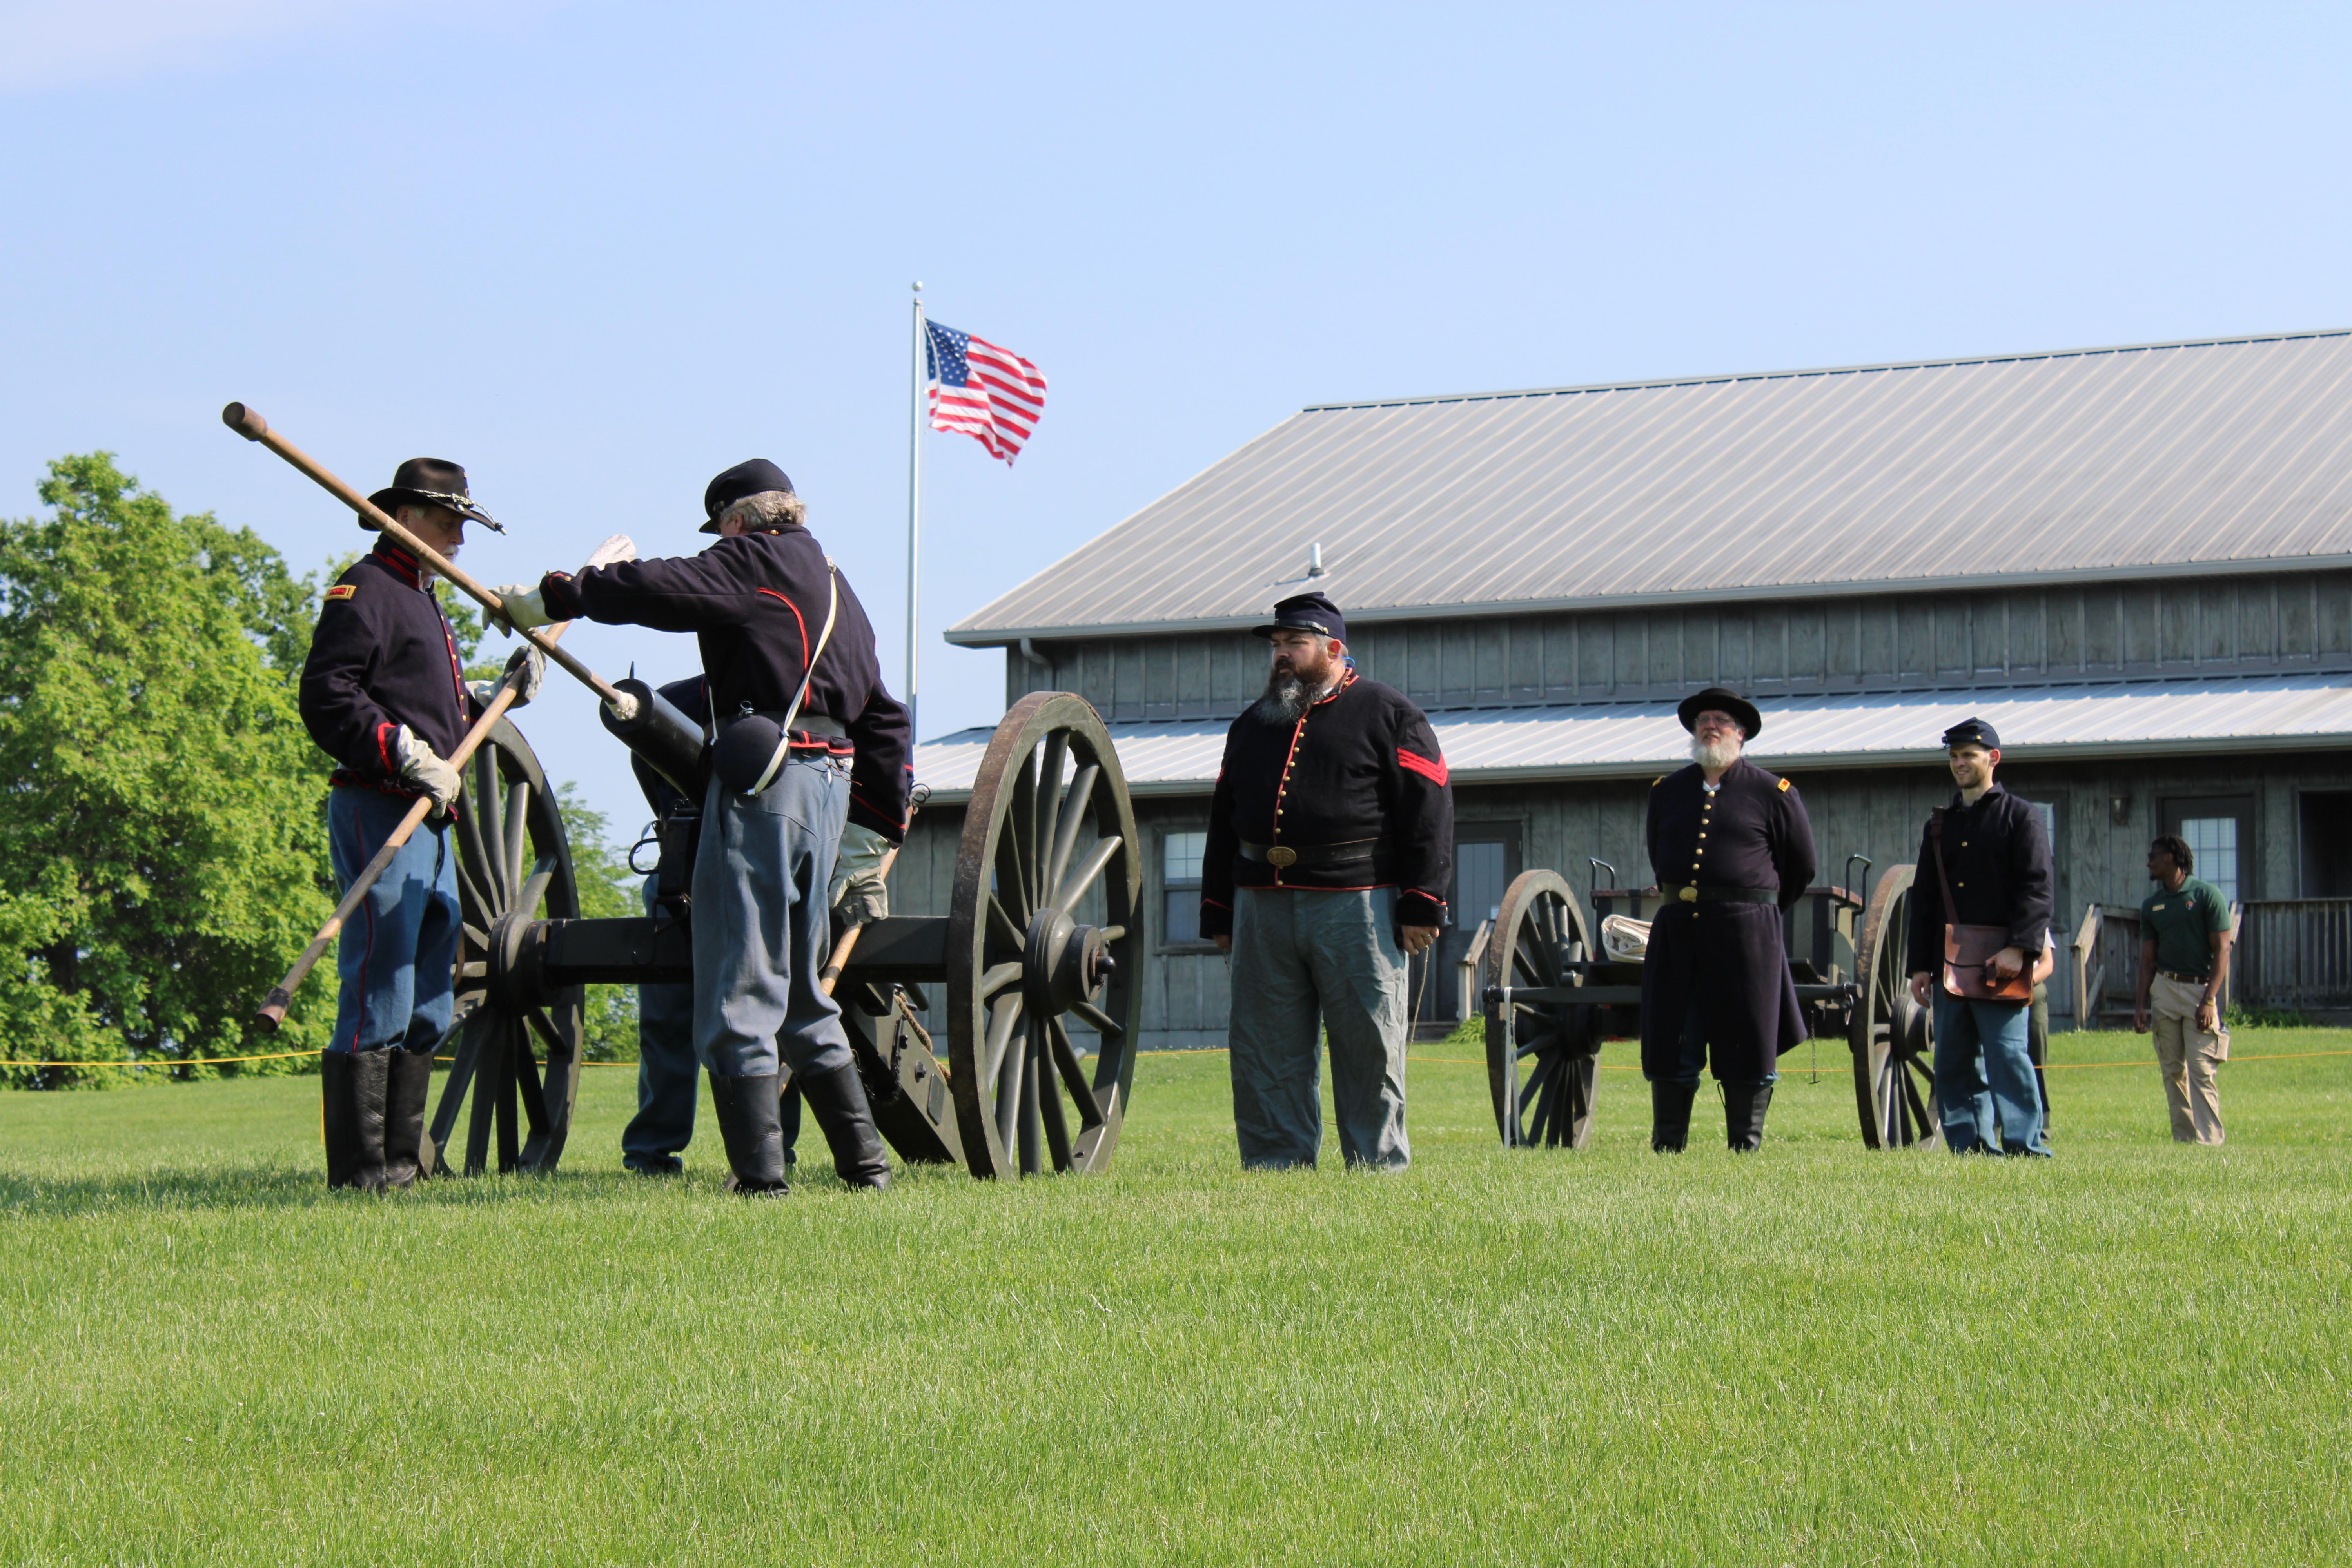 Living Historians portraying US Army artillery practice loading a cannon